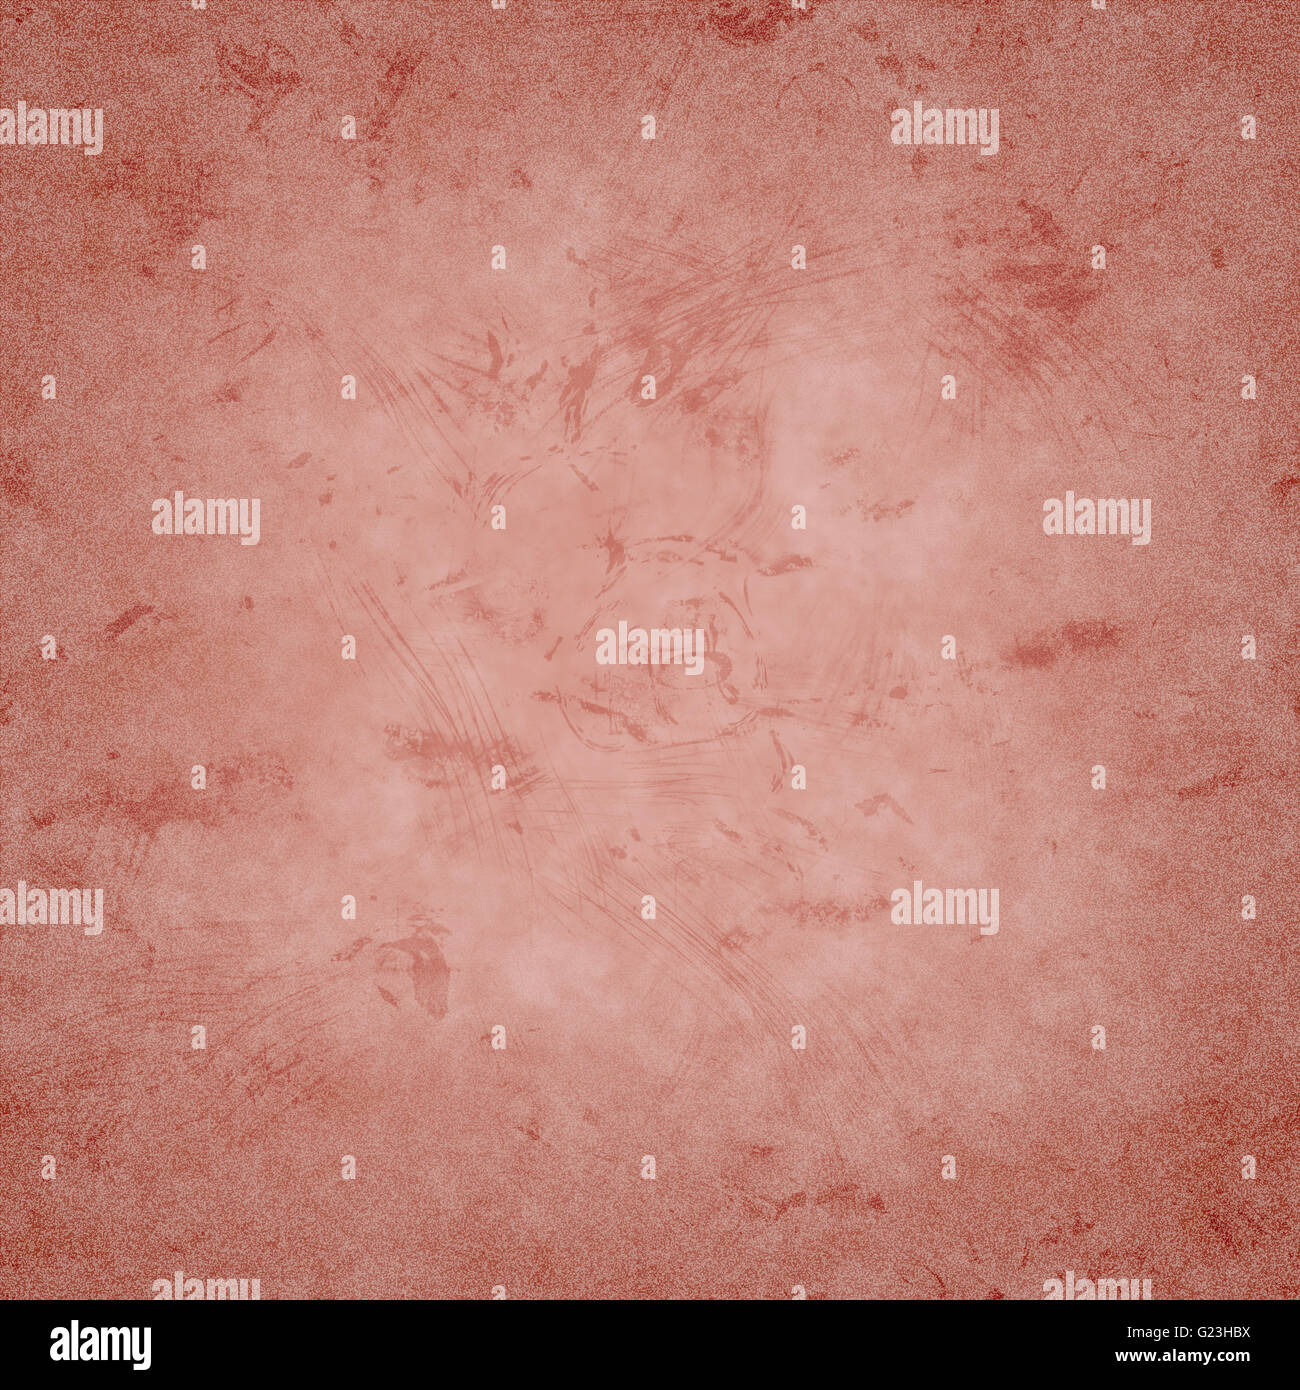 Pink, red, brown colored abstract grunge texture background with stains, spray noise and paint strokes Stock Photo